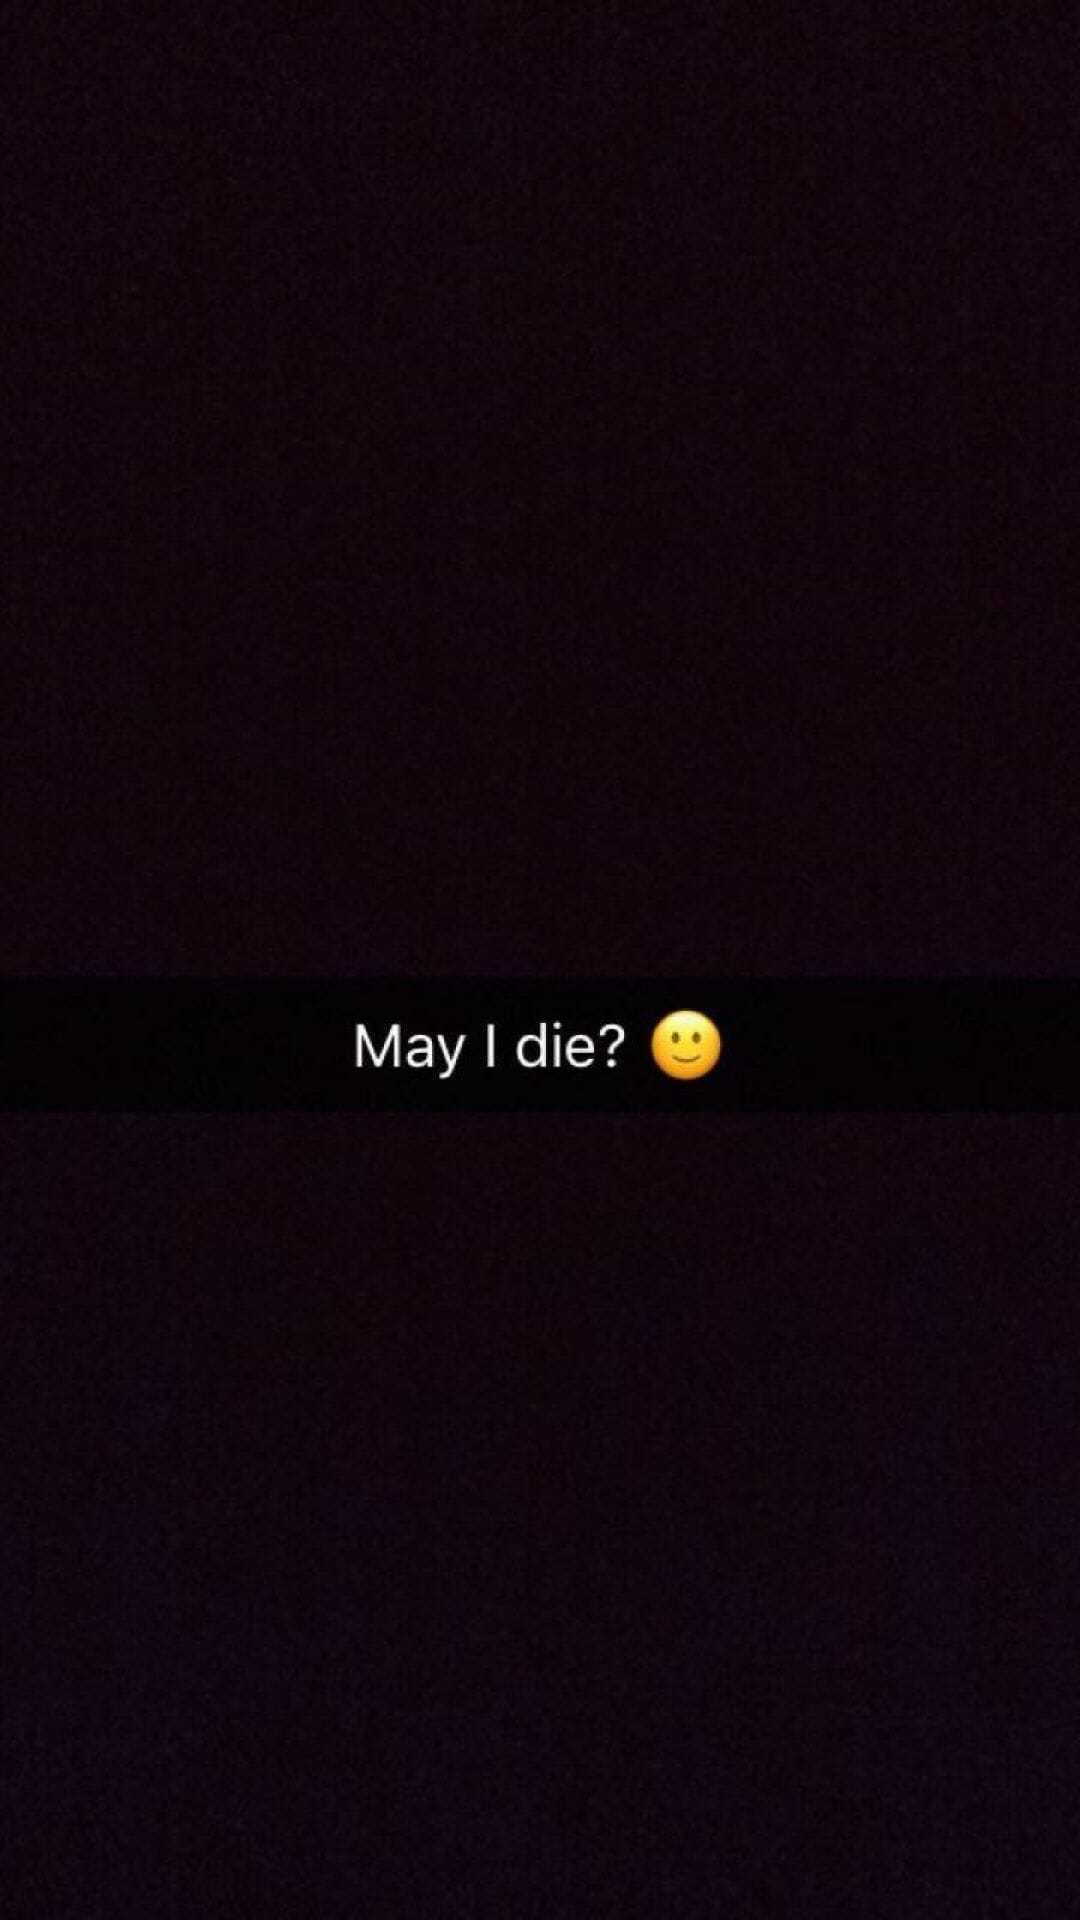 May I die? with a smiley face - Depressing, depression